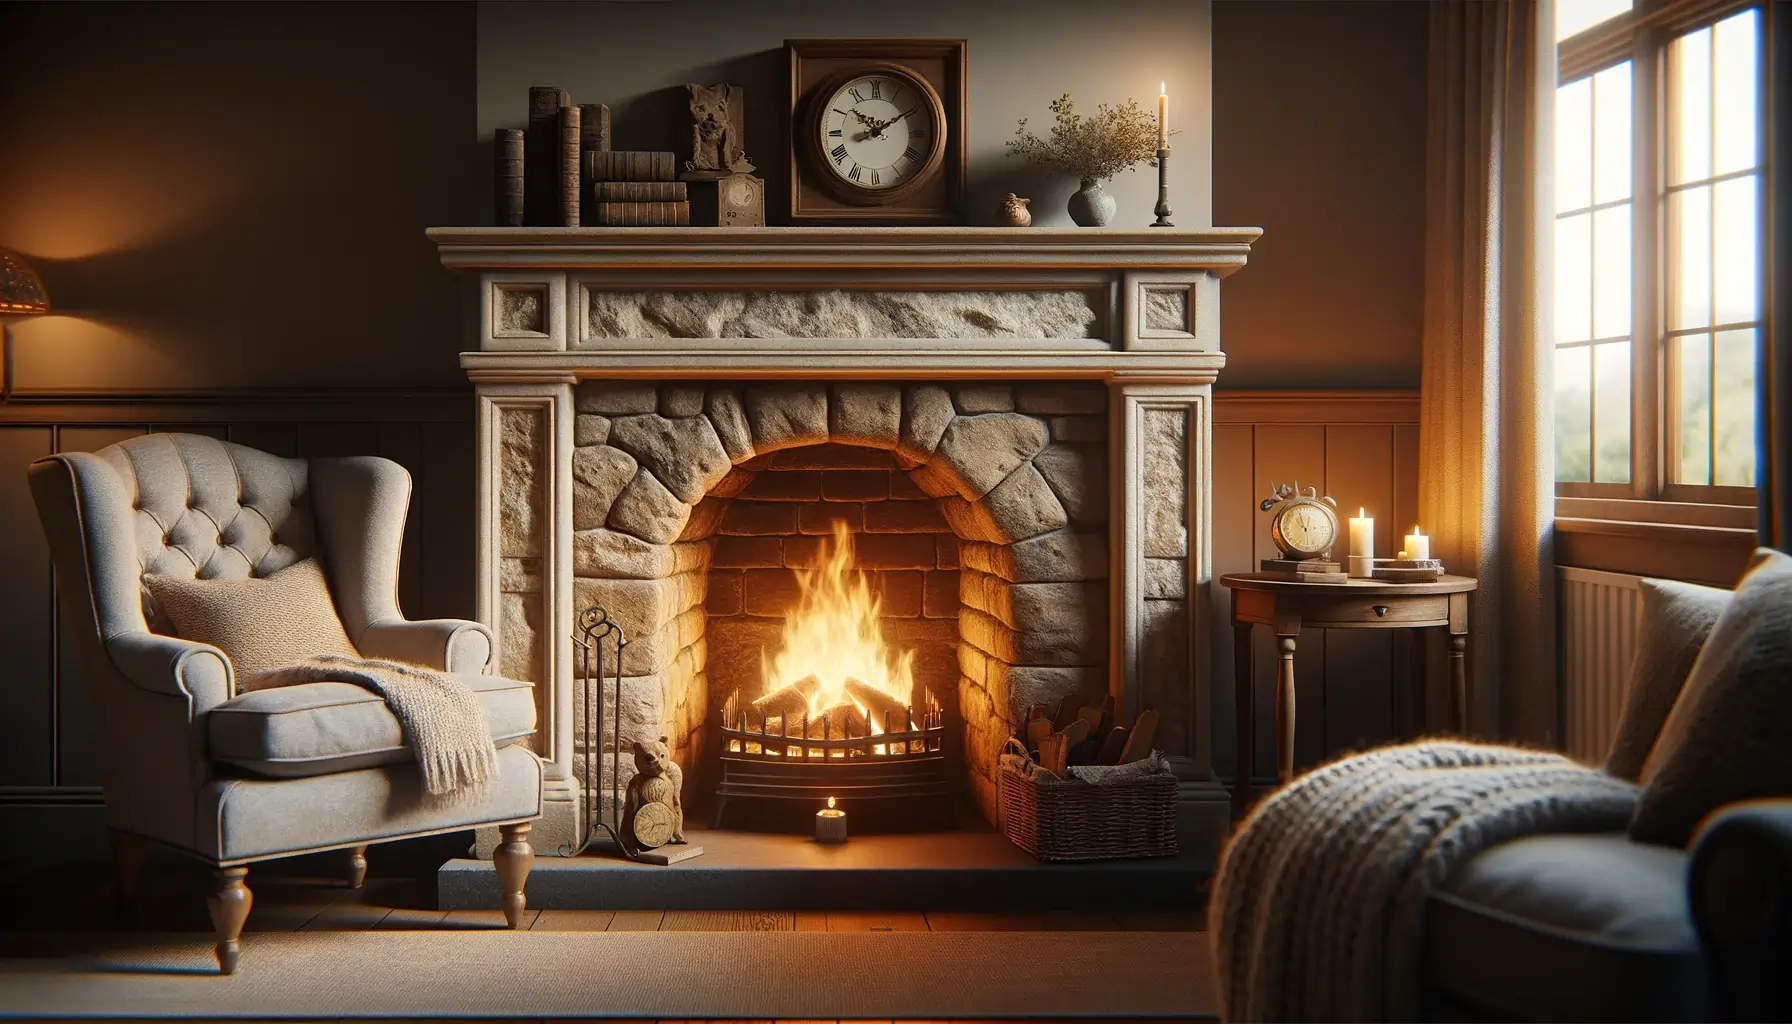 Decor Must Haves to Turn Your Space into a Cozy Winter Lodge